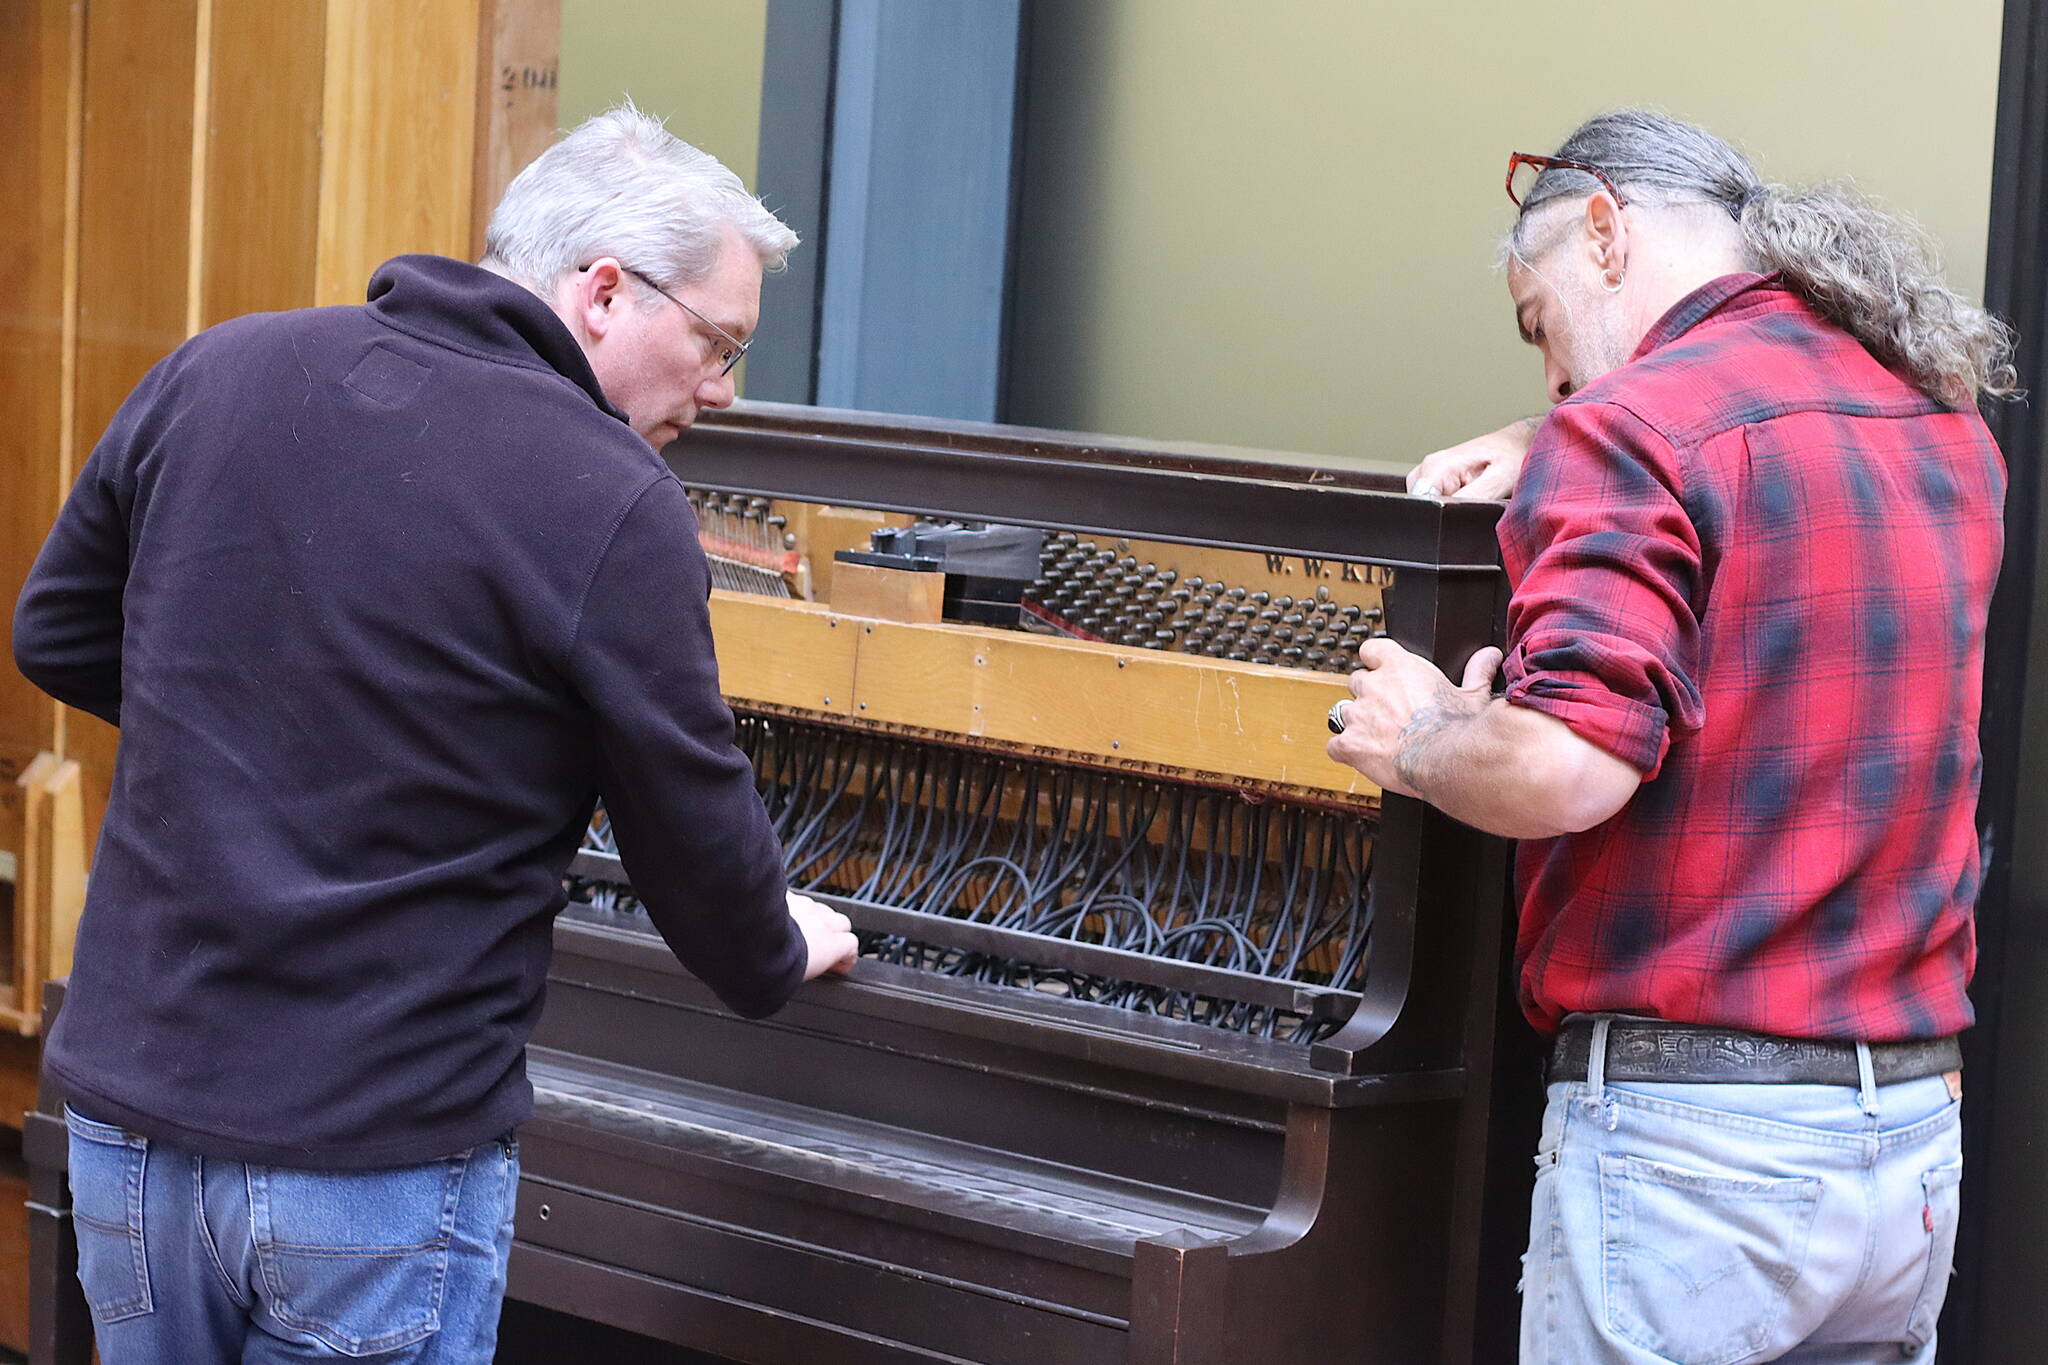 Christopher Nordwall, left, and Michael Ruppert inspect the wiring of the piano-style keyboard component of the 1928 Kimball Theatre Pipe Organ in the State Office Building on Tuesday. The component is not currently wired to the main apparatus of the instrument, so it will not be playable if performances resume as expected this month.